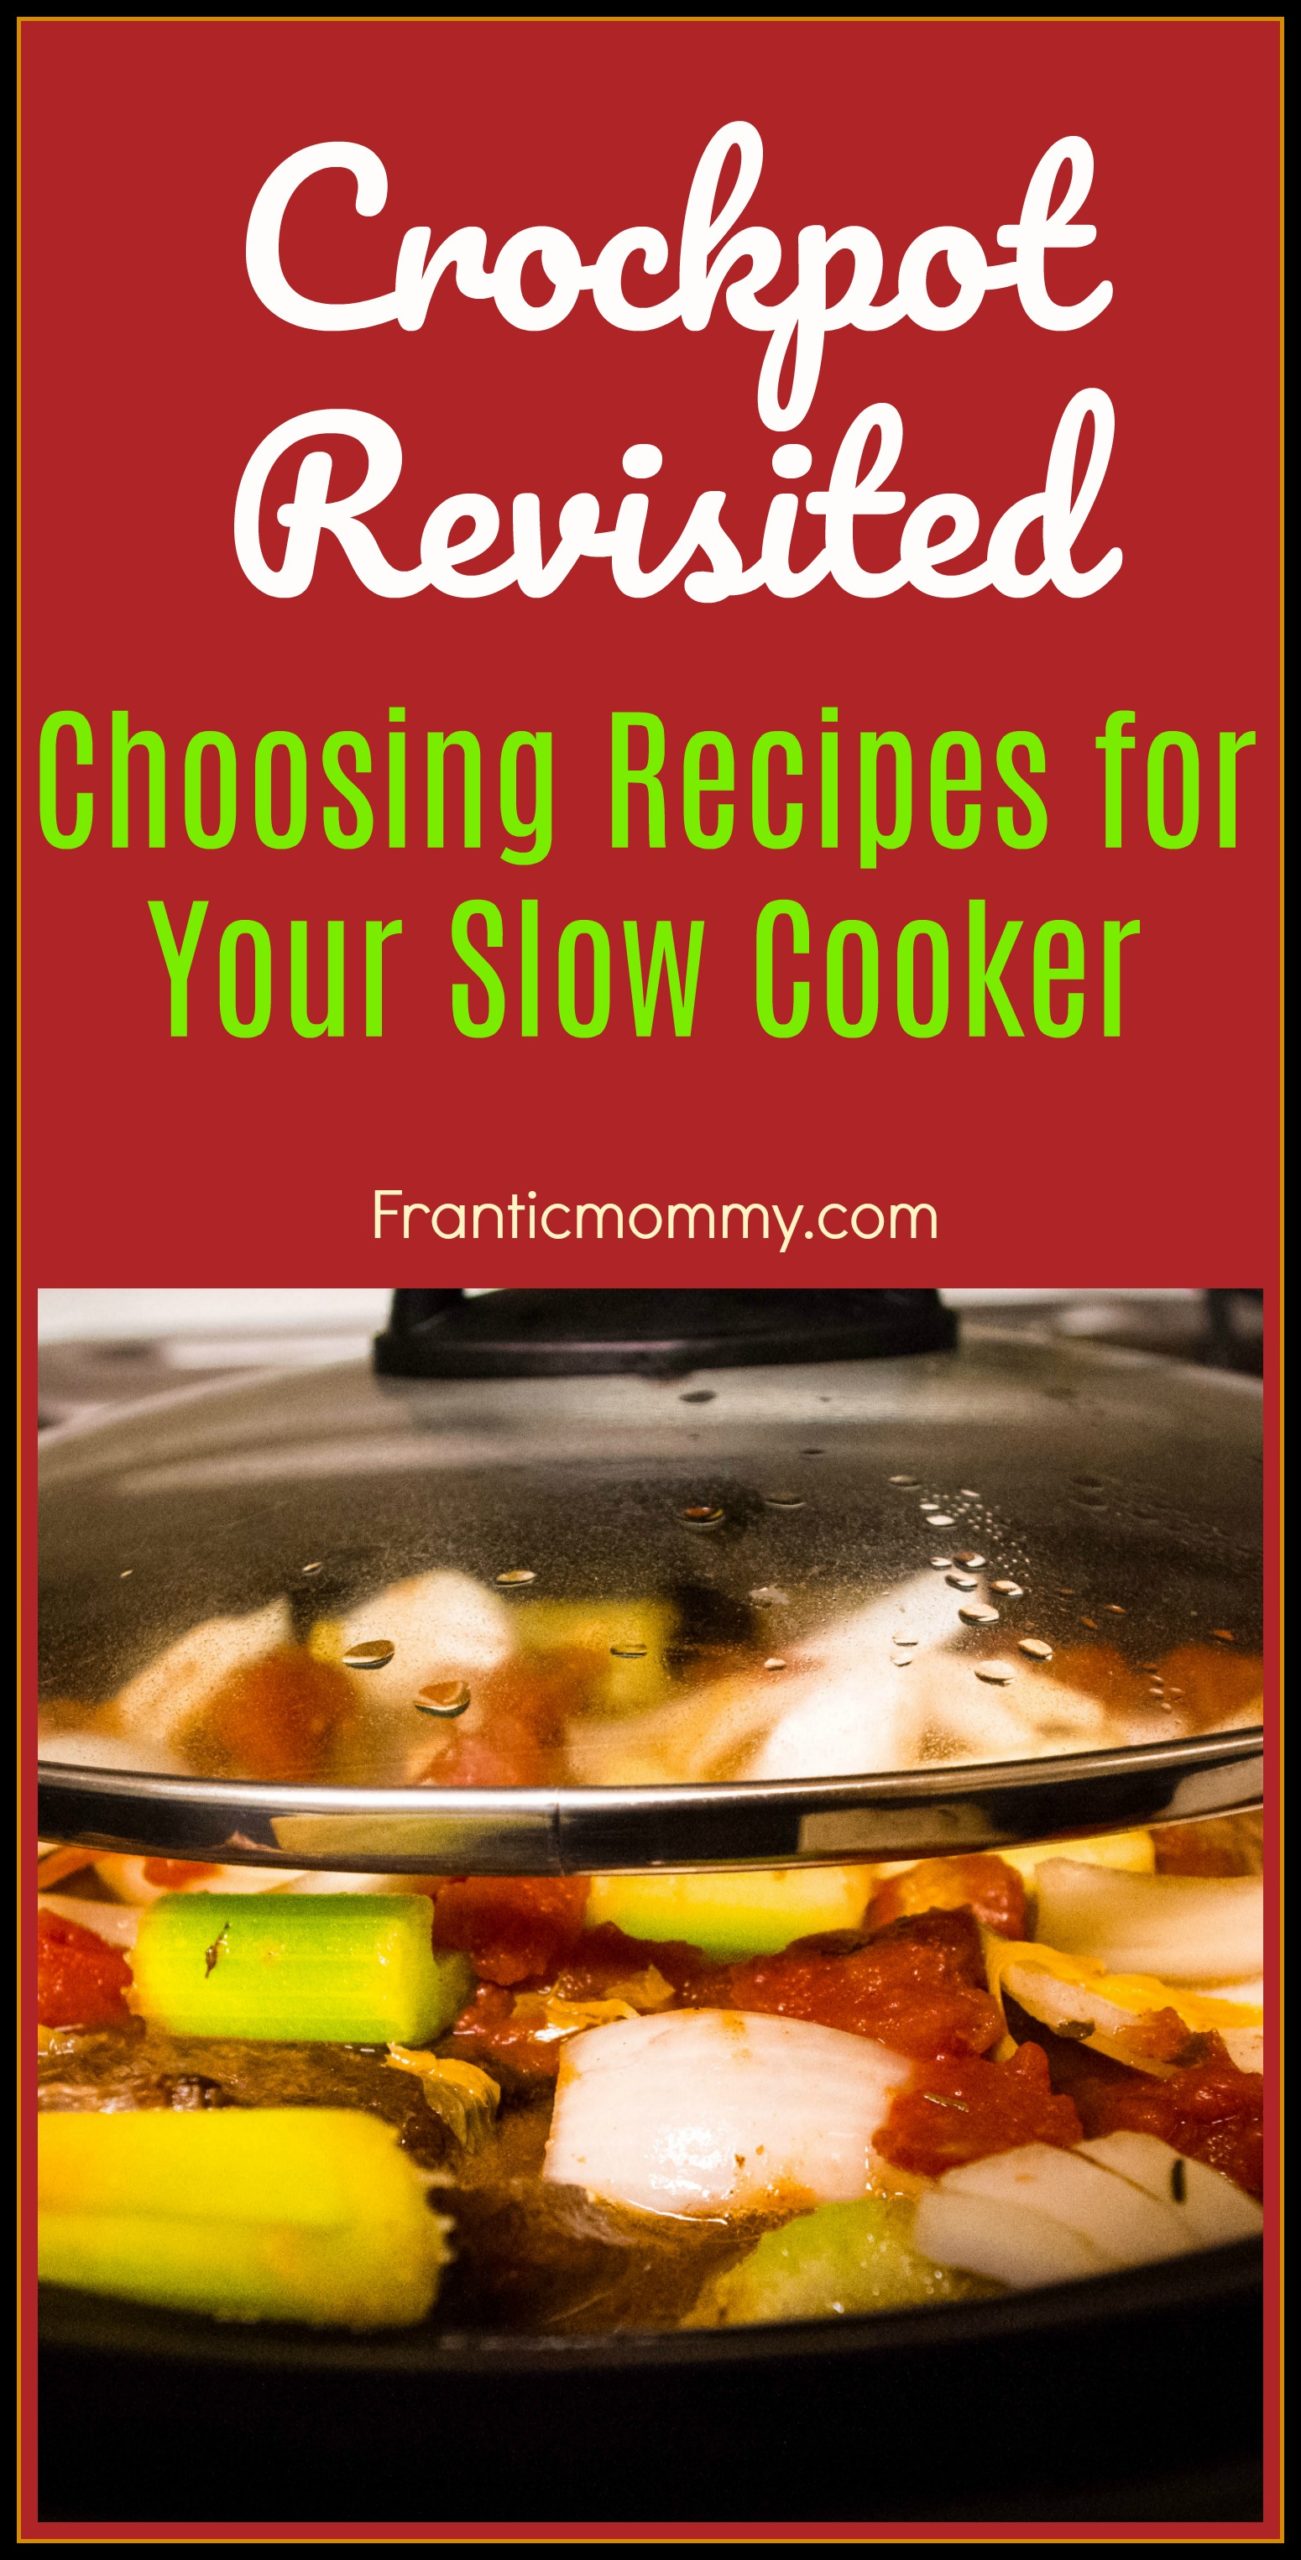 Crockpot Revisited-Choosing Recipes for Your Slow Cooker